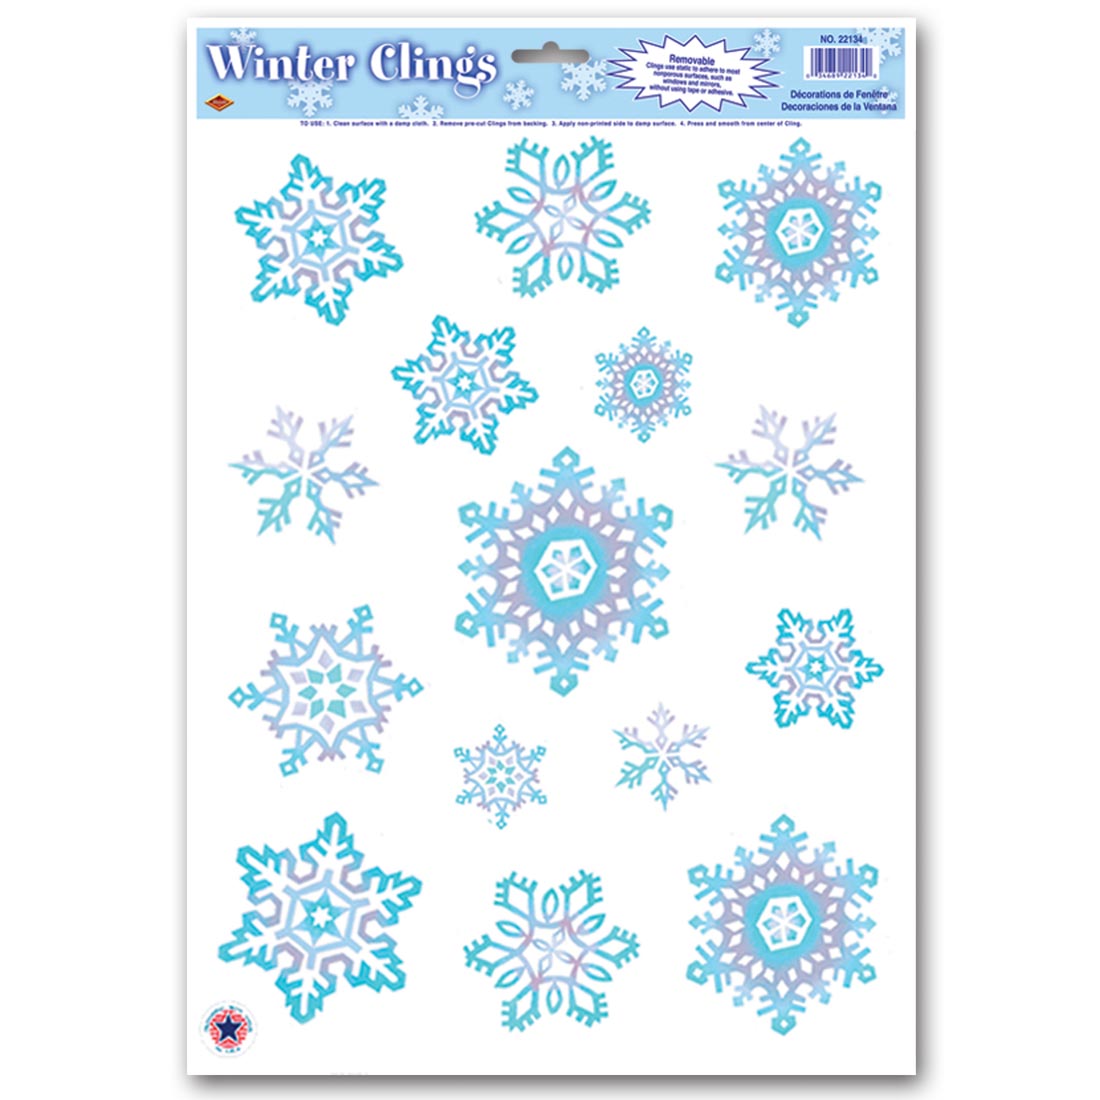 Snowflake Winter Window Clings by Beistle Company